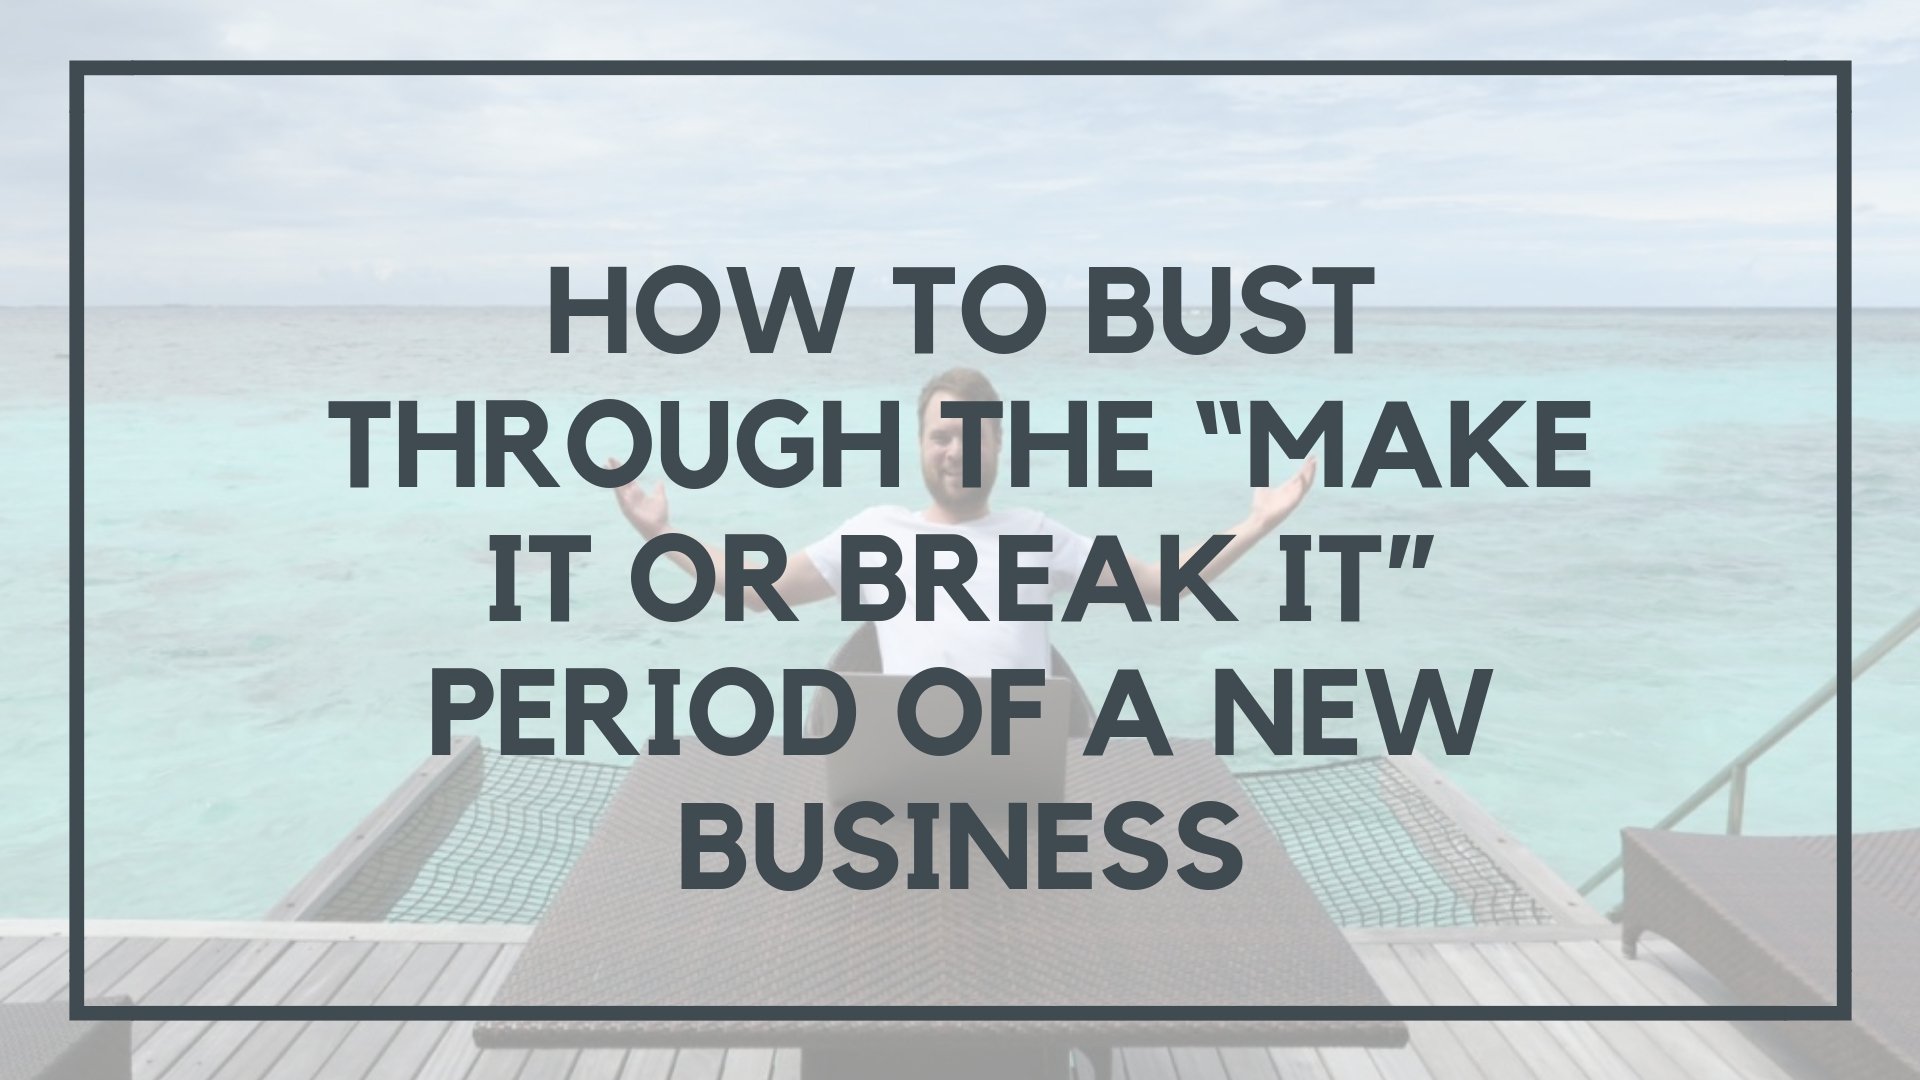 How to Bust Through the “Make it or Break it” Period of a New Business